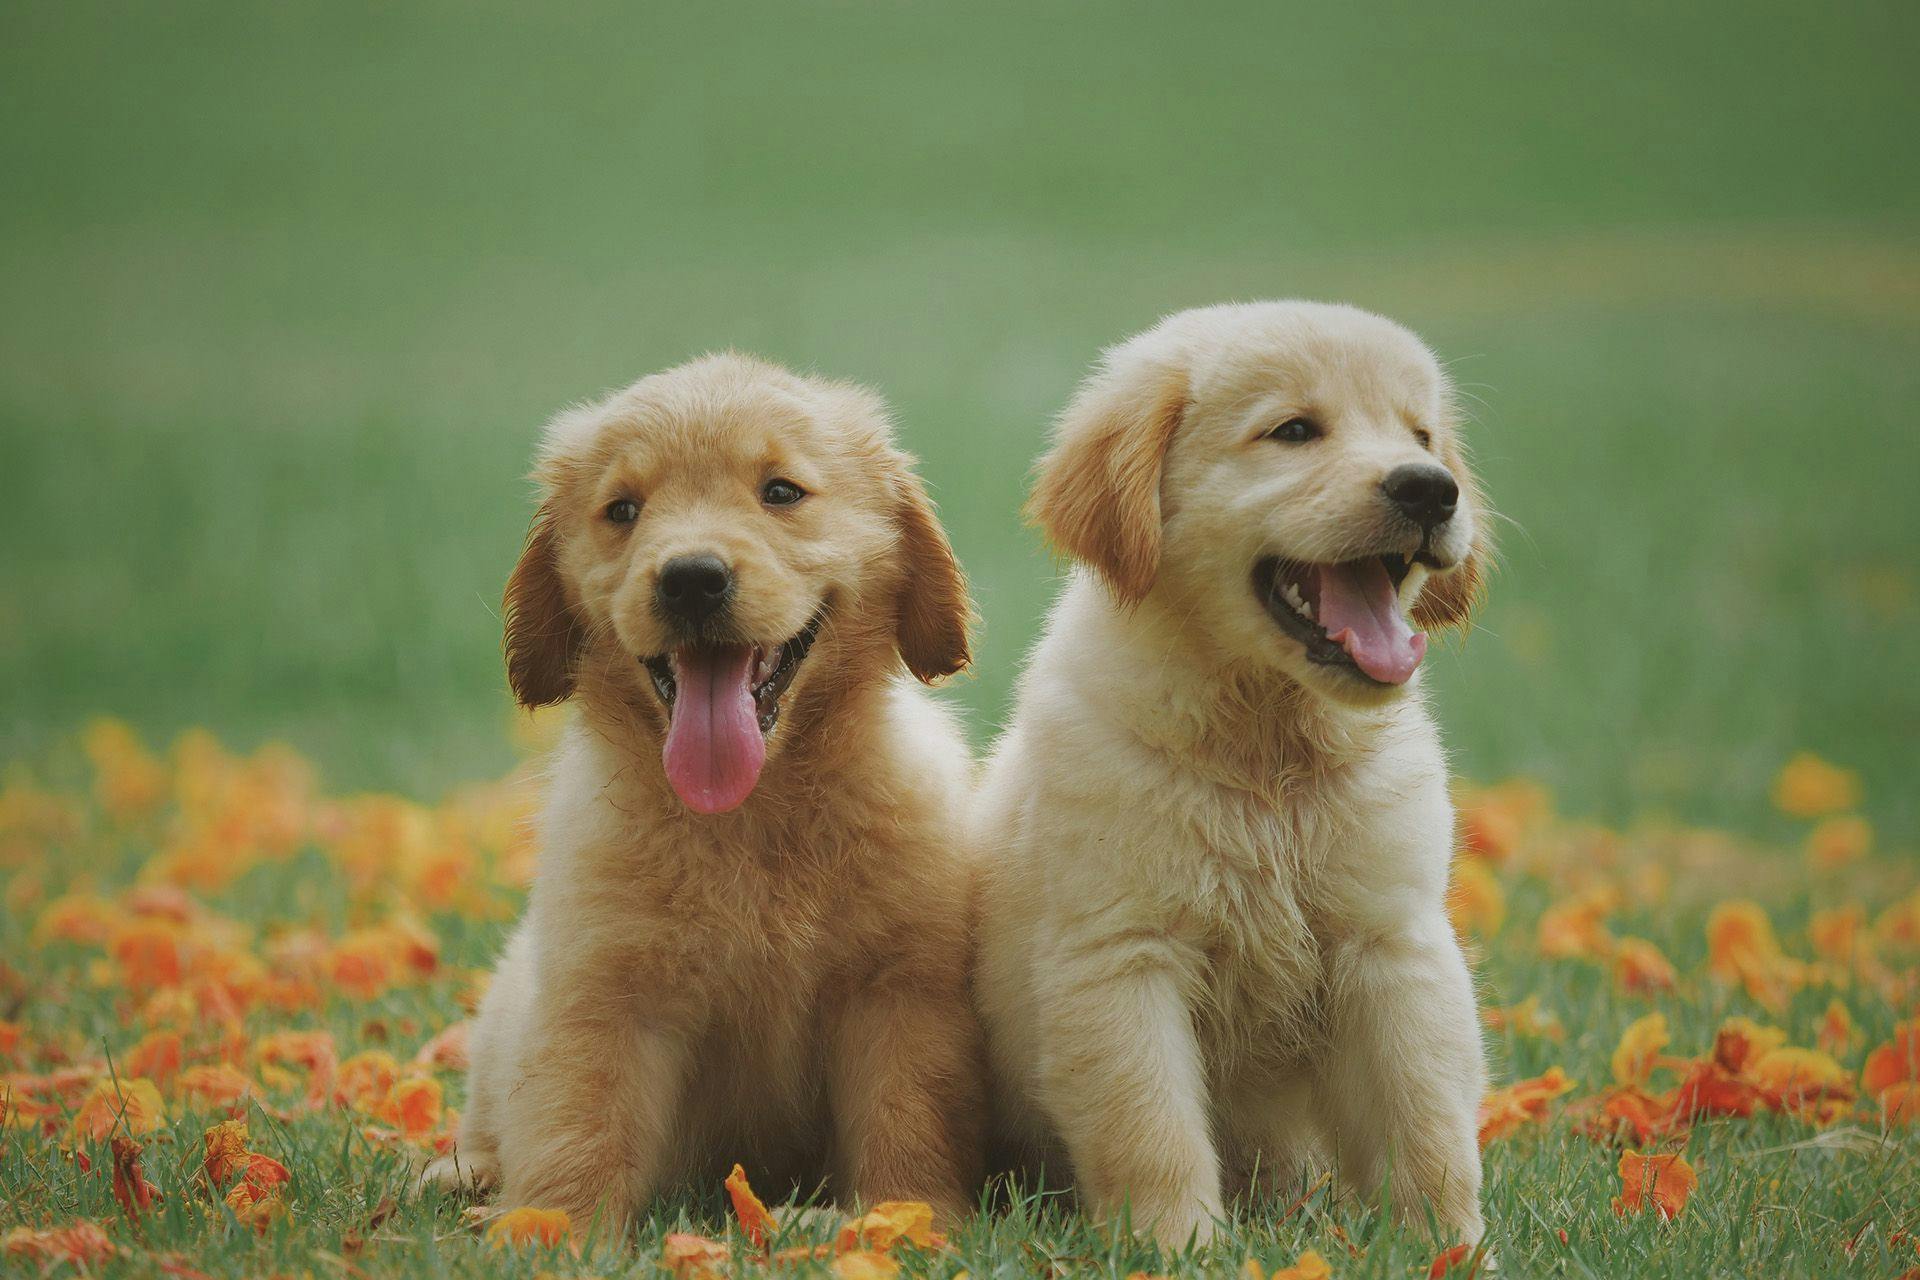 Two puppies sitting on grass